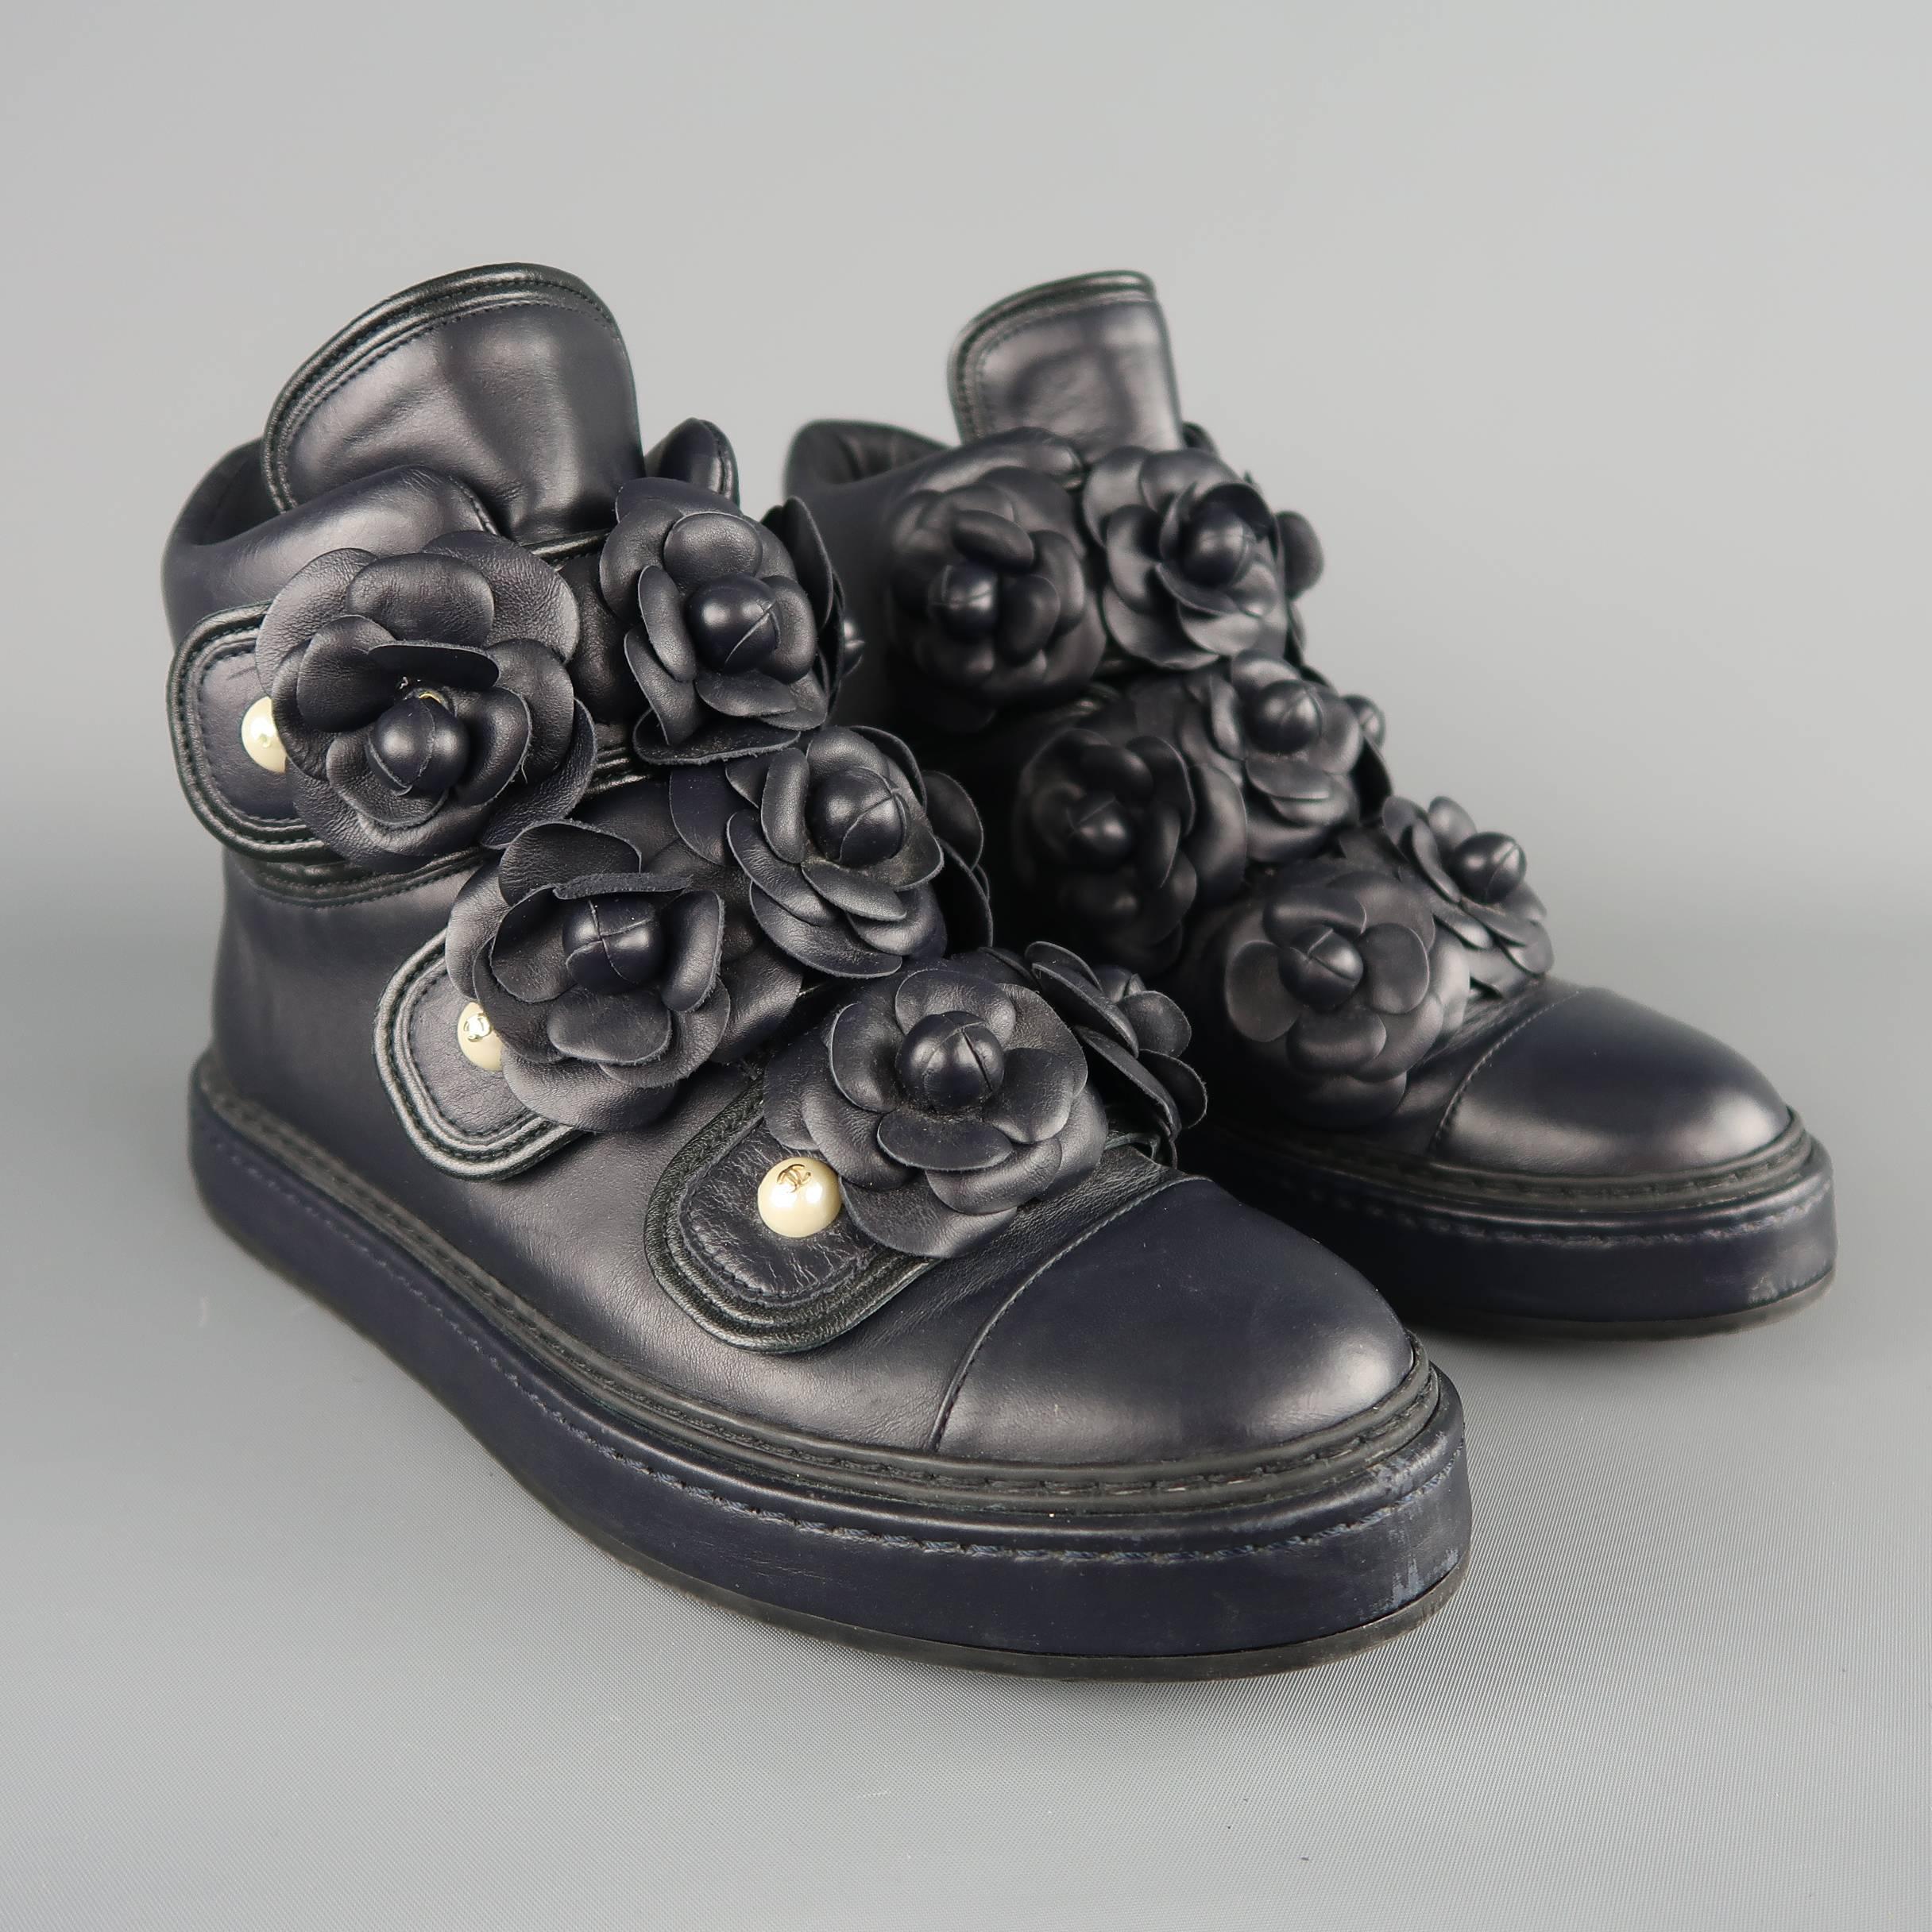 Chanel high top sneakers come in navy blue leather with three velcro straps embellished with leather camellia flowers. Wear throughout. CC logo missing from top pearl on both shoes. As-is.  Made in Italy.  Good Pre-Owned Condition.
Marked: IT 37
